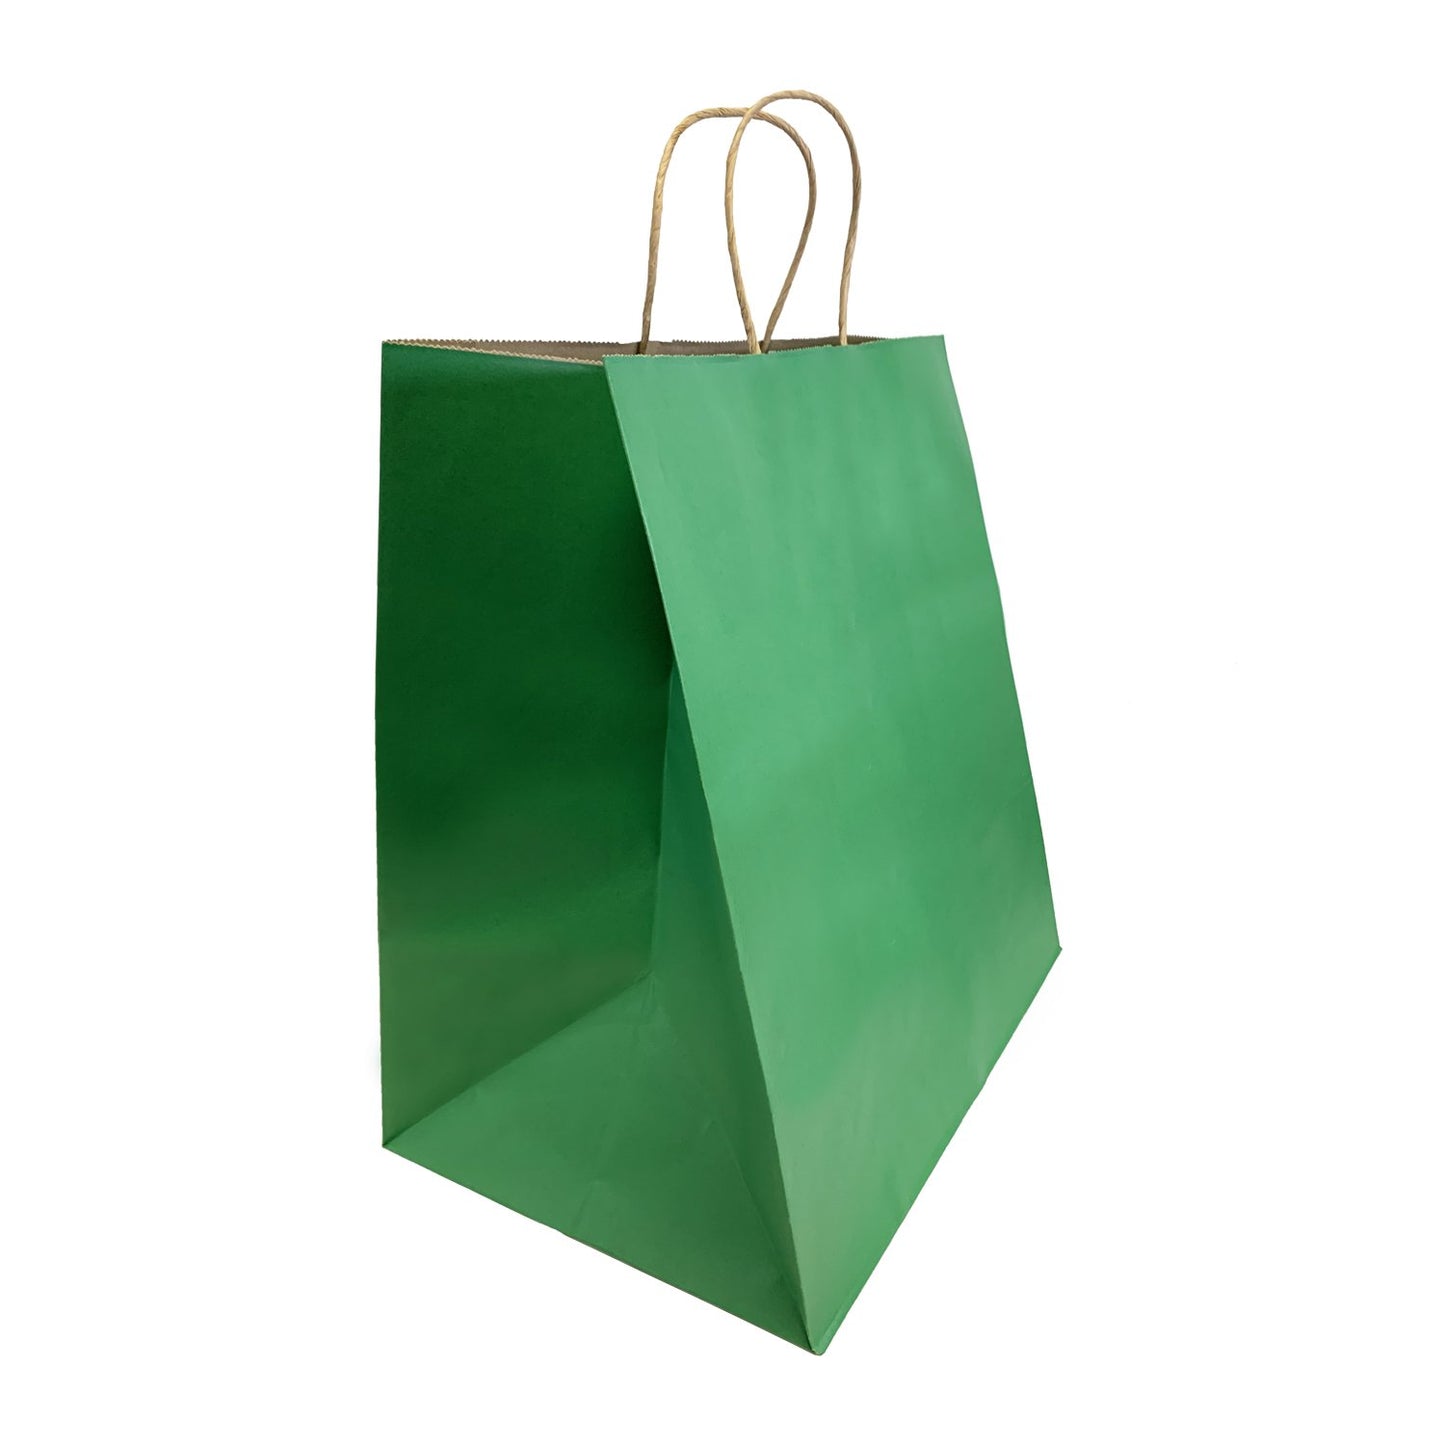 200 Pcs, Super Royal, 14x10x15.75 inches, Green Kraft Paper Bags, with Twisted Handle